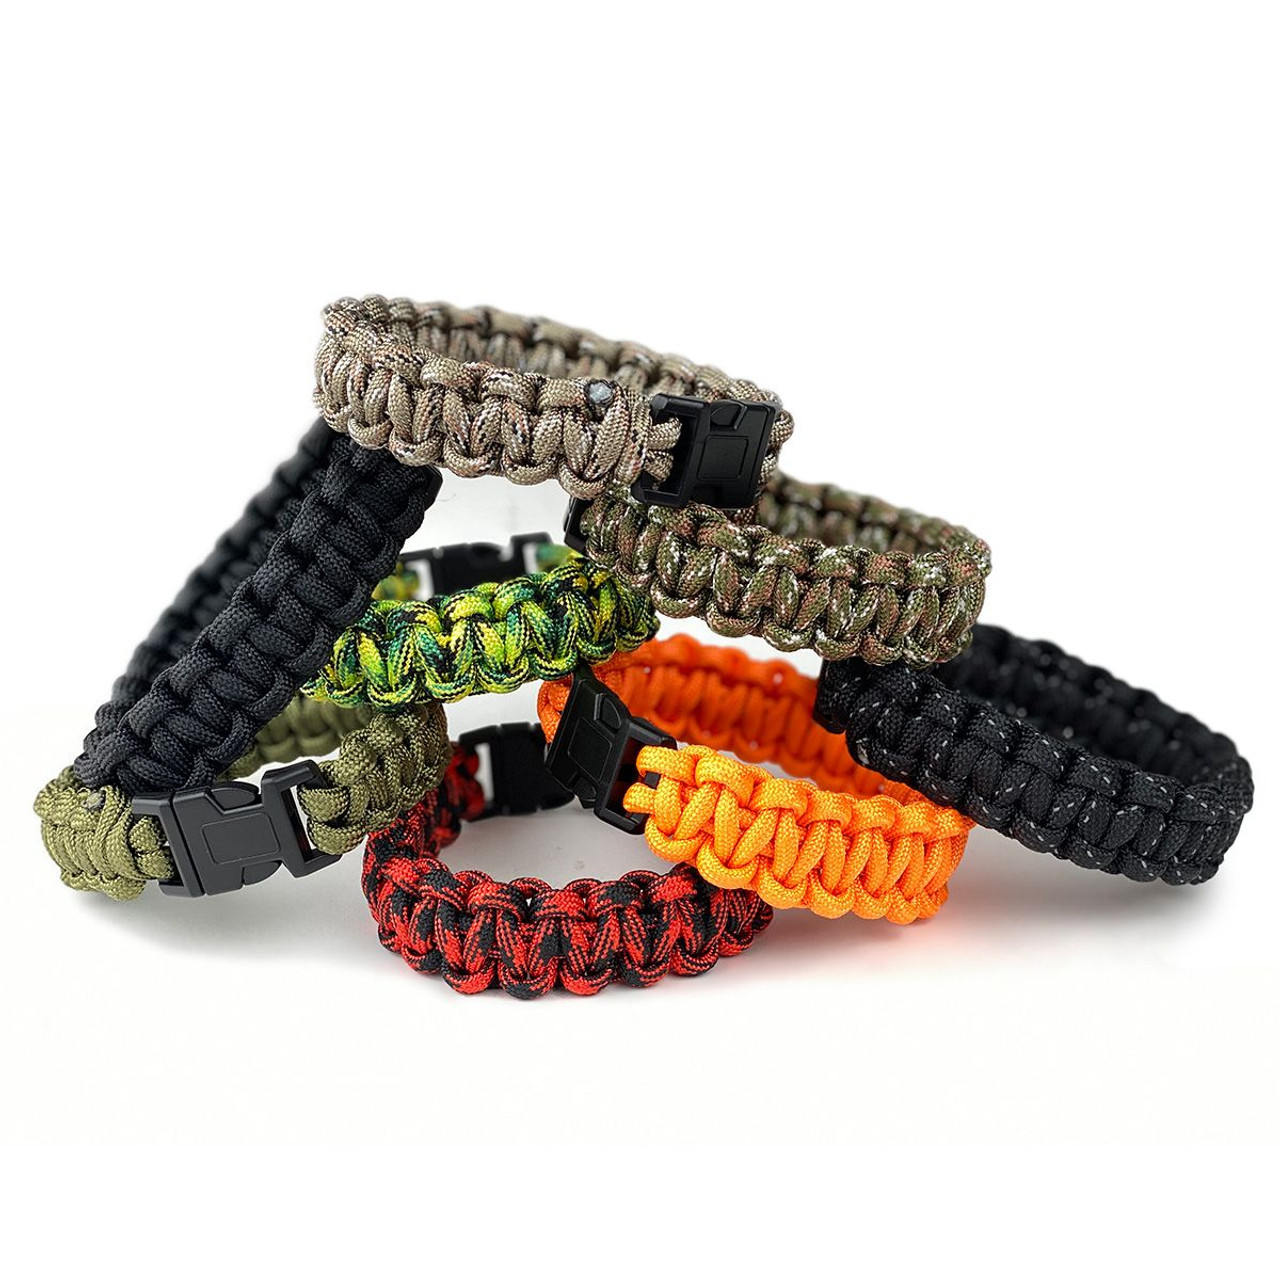 https://cdn11.bigcommerce.com/s-tumf4kk1l4/images/stencil/1280x1280/products/3845/7085/9-paracord-bracelet-assorted-colors-9-ft-of-paracord-11__18495.1640717135.jpg?c=1?imbypass=on